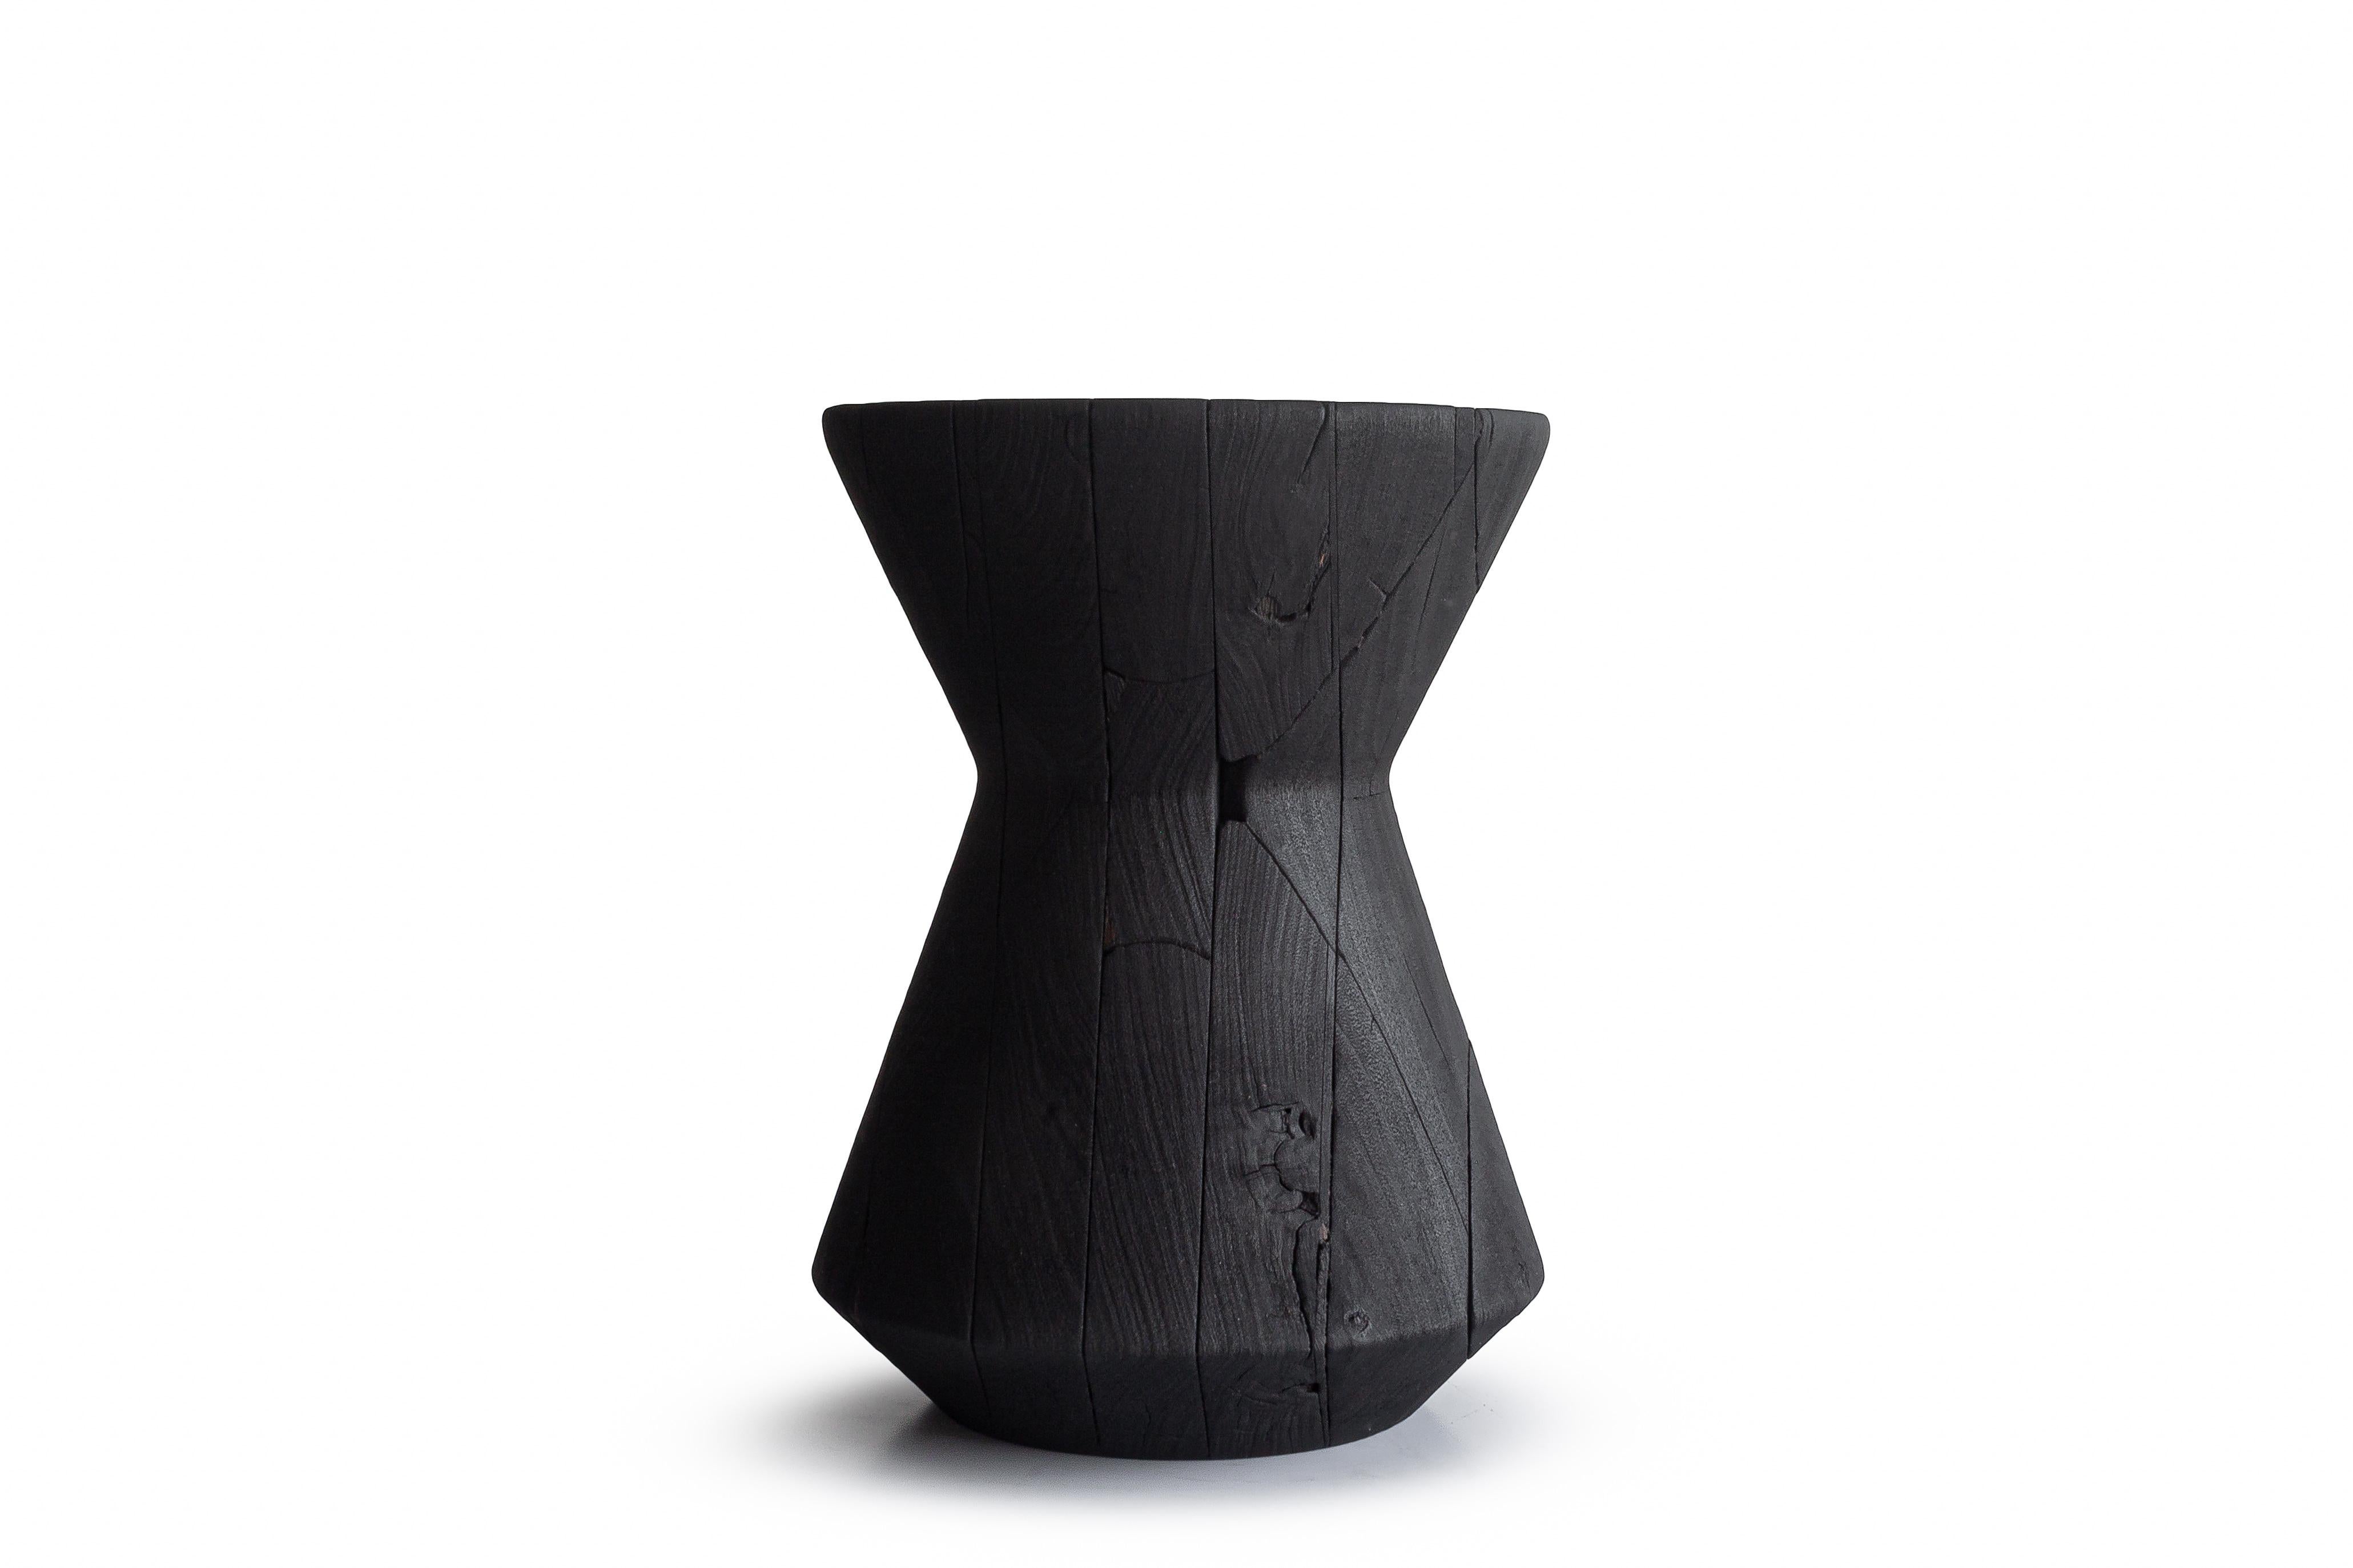 Contemporary black stool Yakisugi by Camilo Andres Rodriguez Marquez (aka CarmWorks)

Burnt wood 

Suitable for outdoor use

Each piece is made to order and hand crafted by the artist.

--
Camilo Andres Rodriguez Marquez is a Colombian born